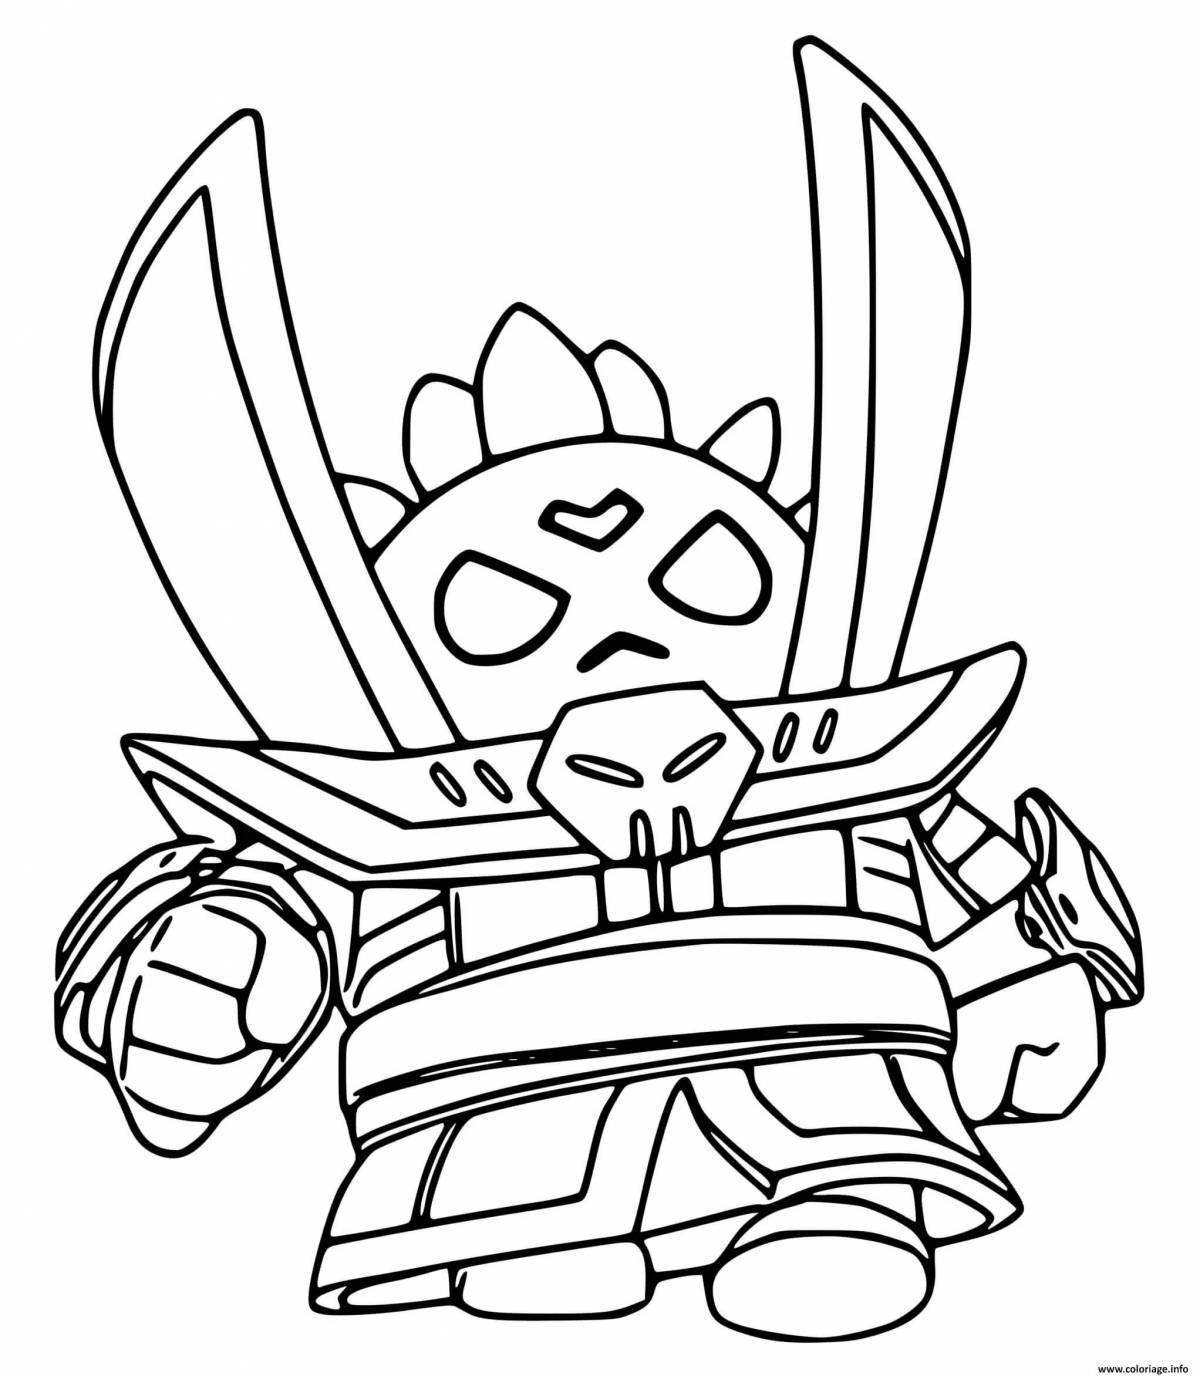 Charming bravo stars feng coloring page